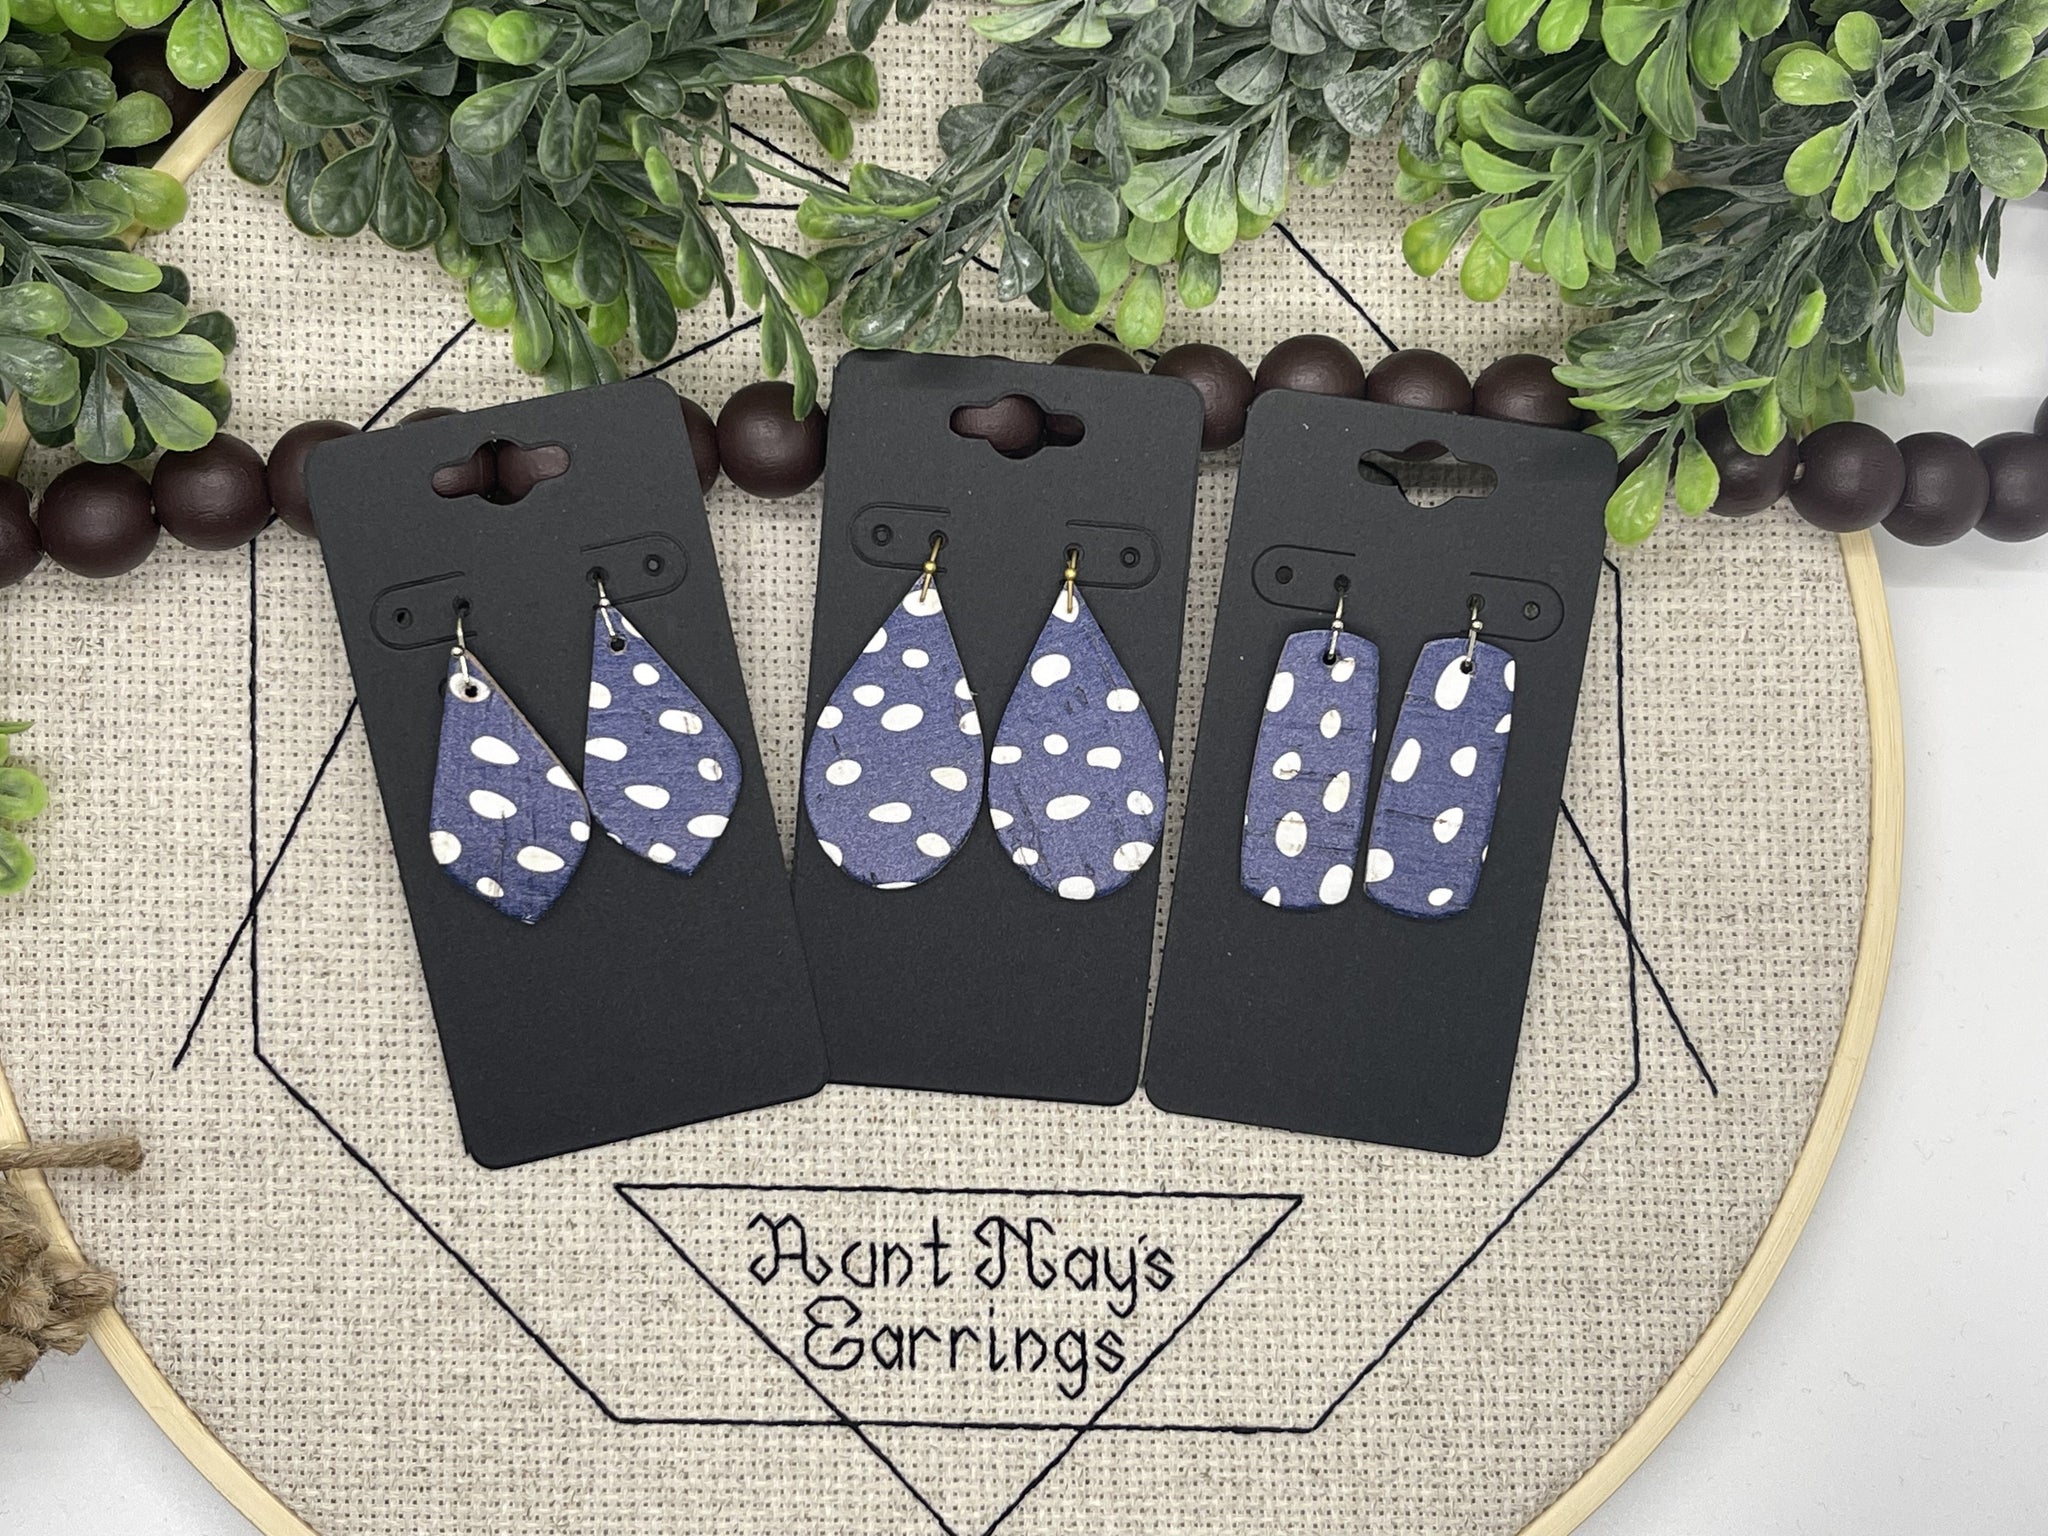 Dark Blue Cork with a White Dob Print on Leather Earrings